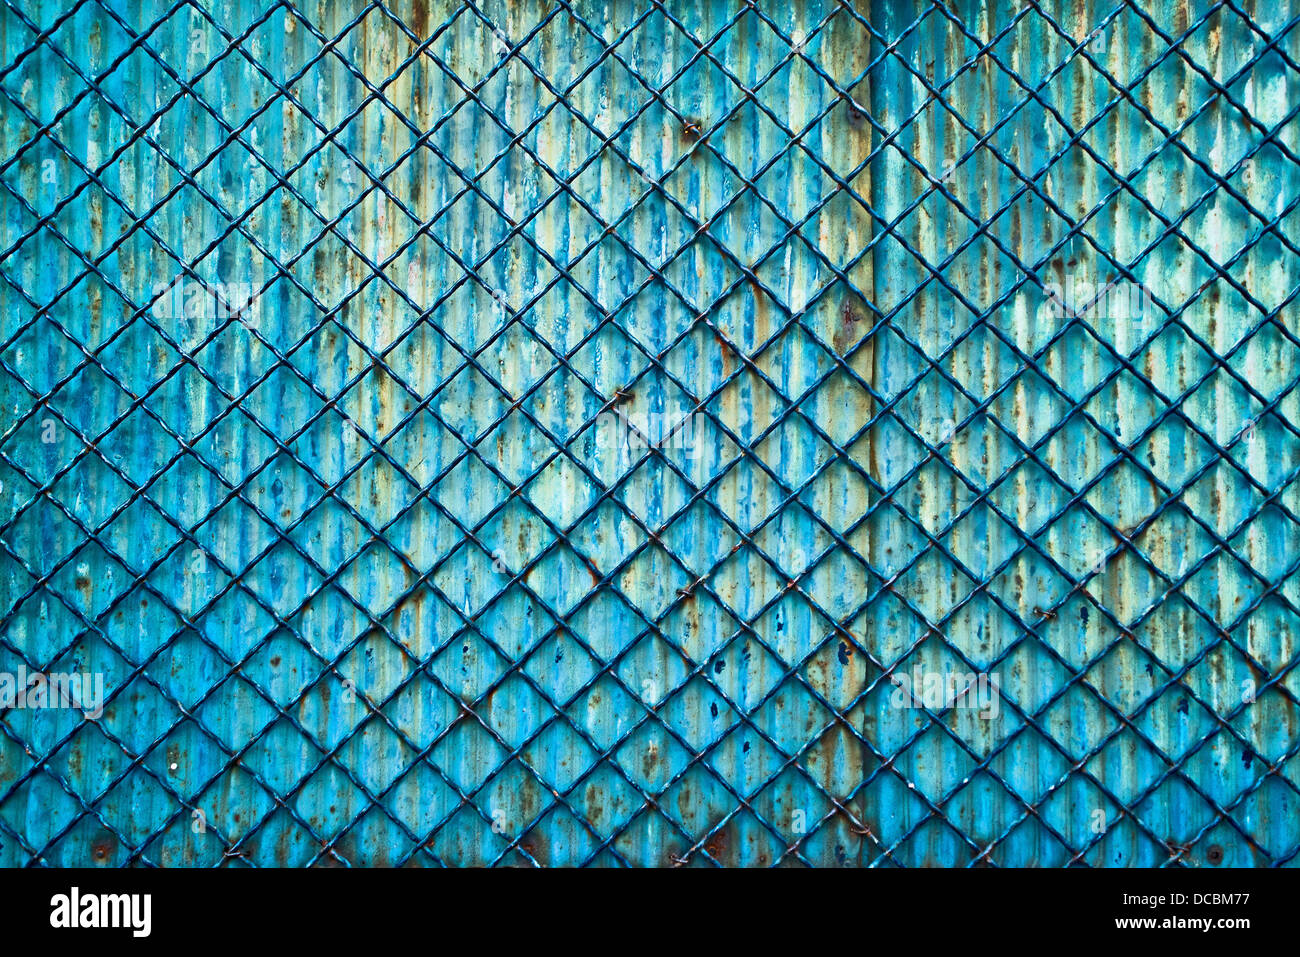 Metal grid fence as old grunge background Stock Photo